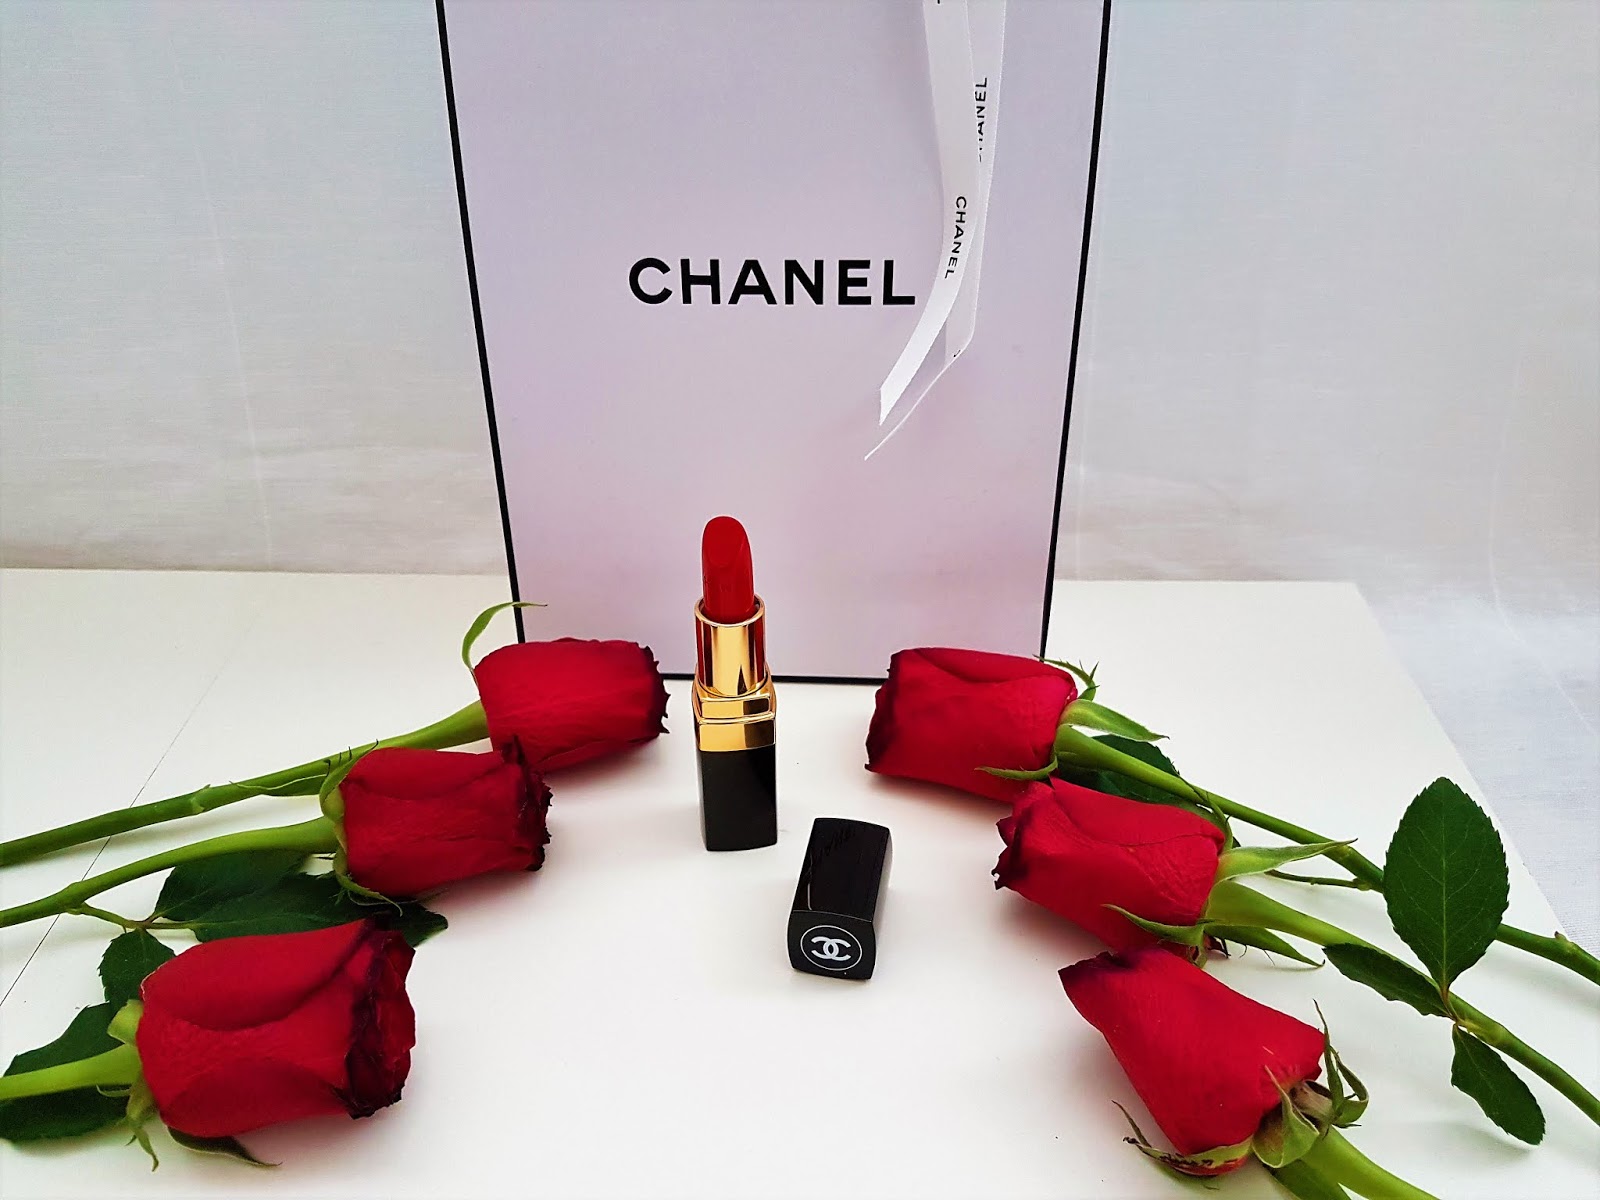 THE EXCLUSIVE BEAUTY DIARY : CHANEL ROUGE COCO ULTRA HYDRATING LIP COLOUR -  466 - CARMEN